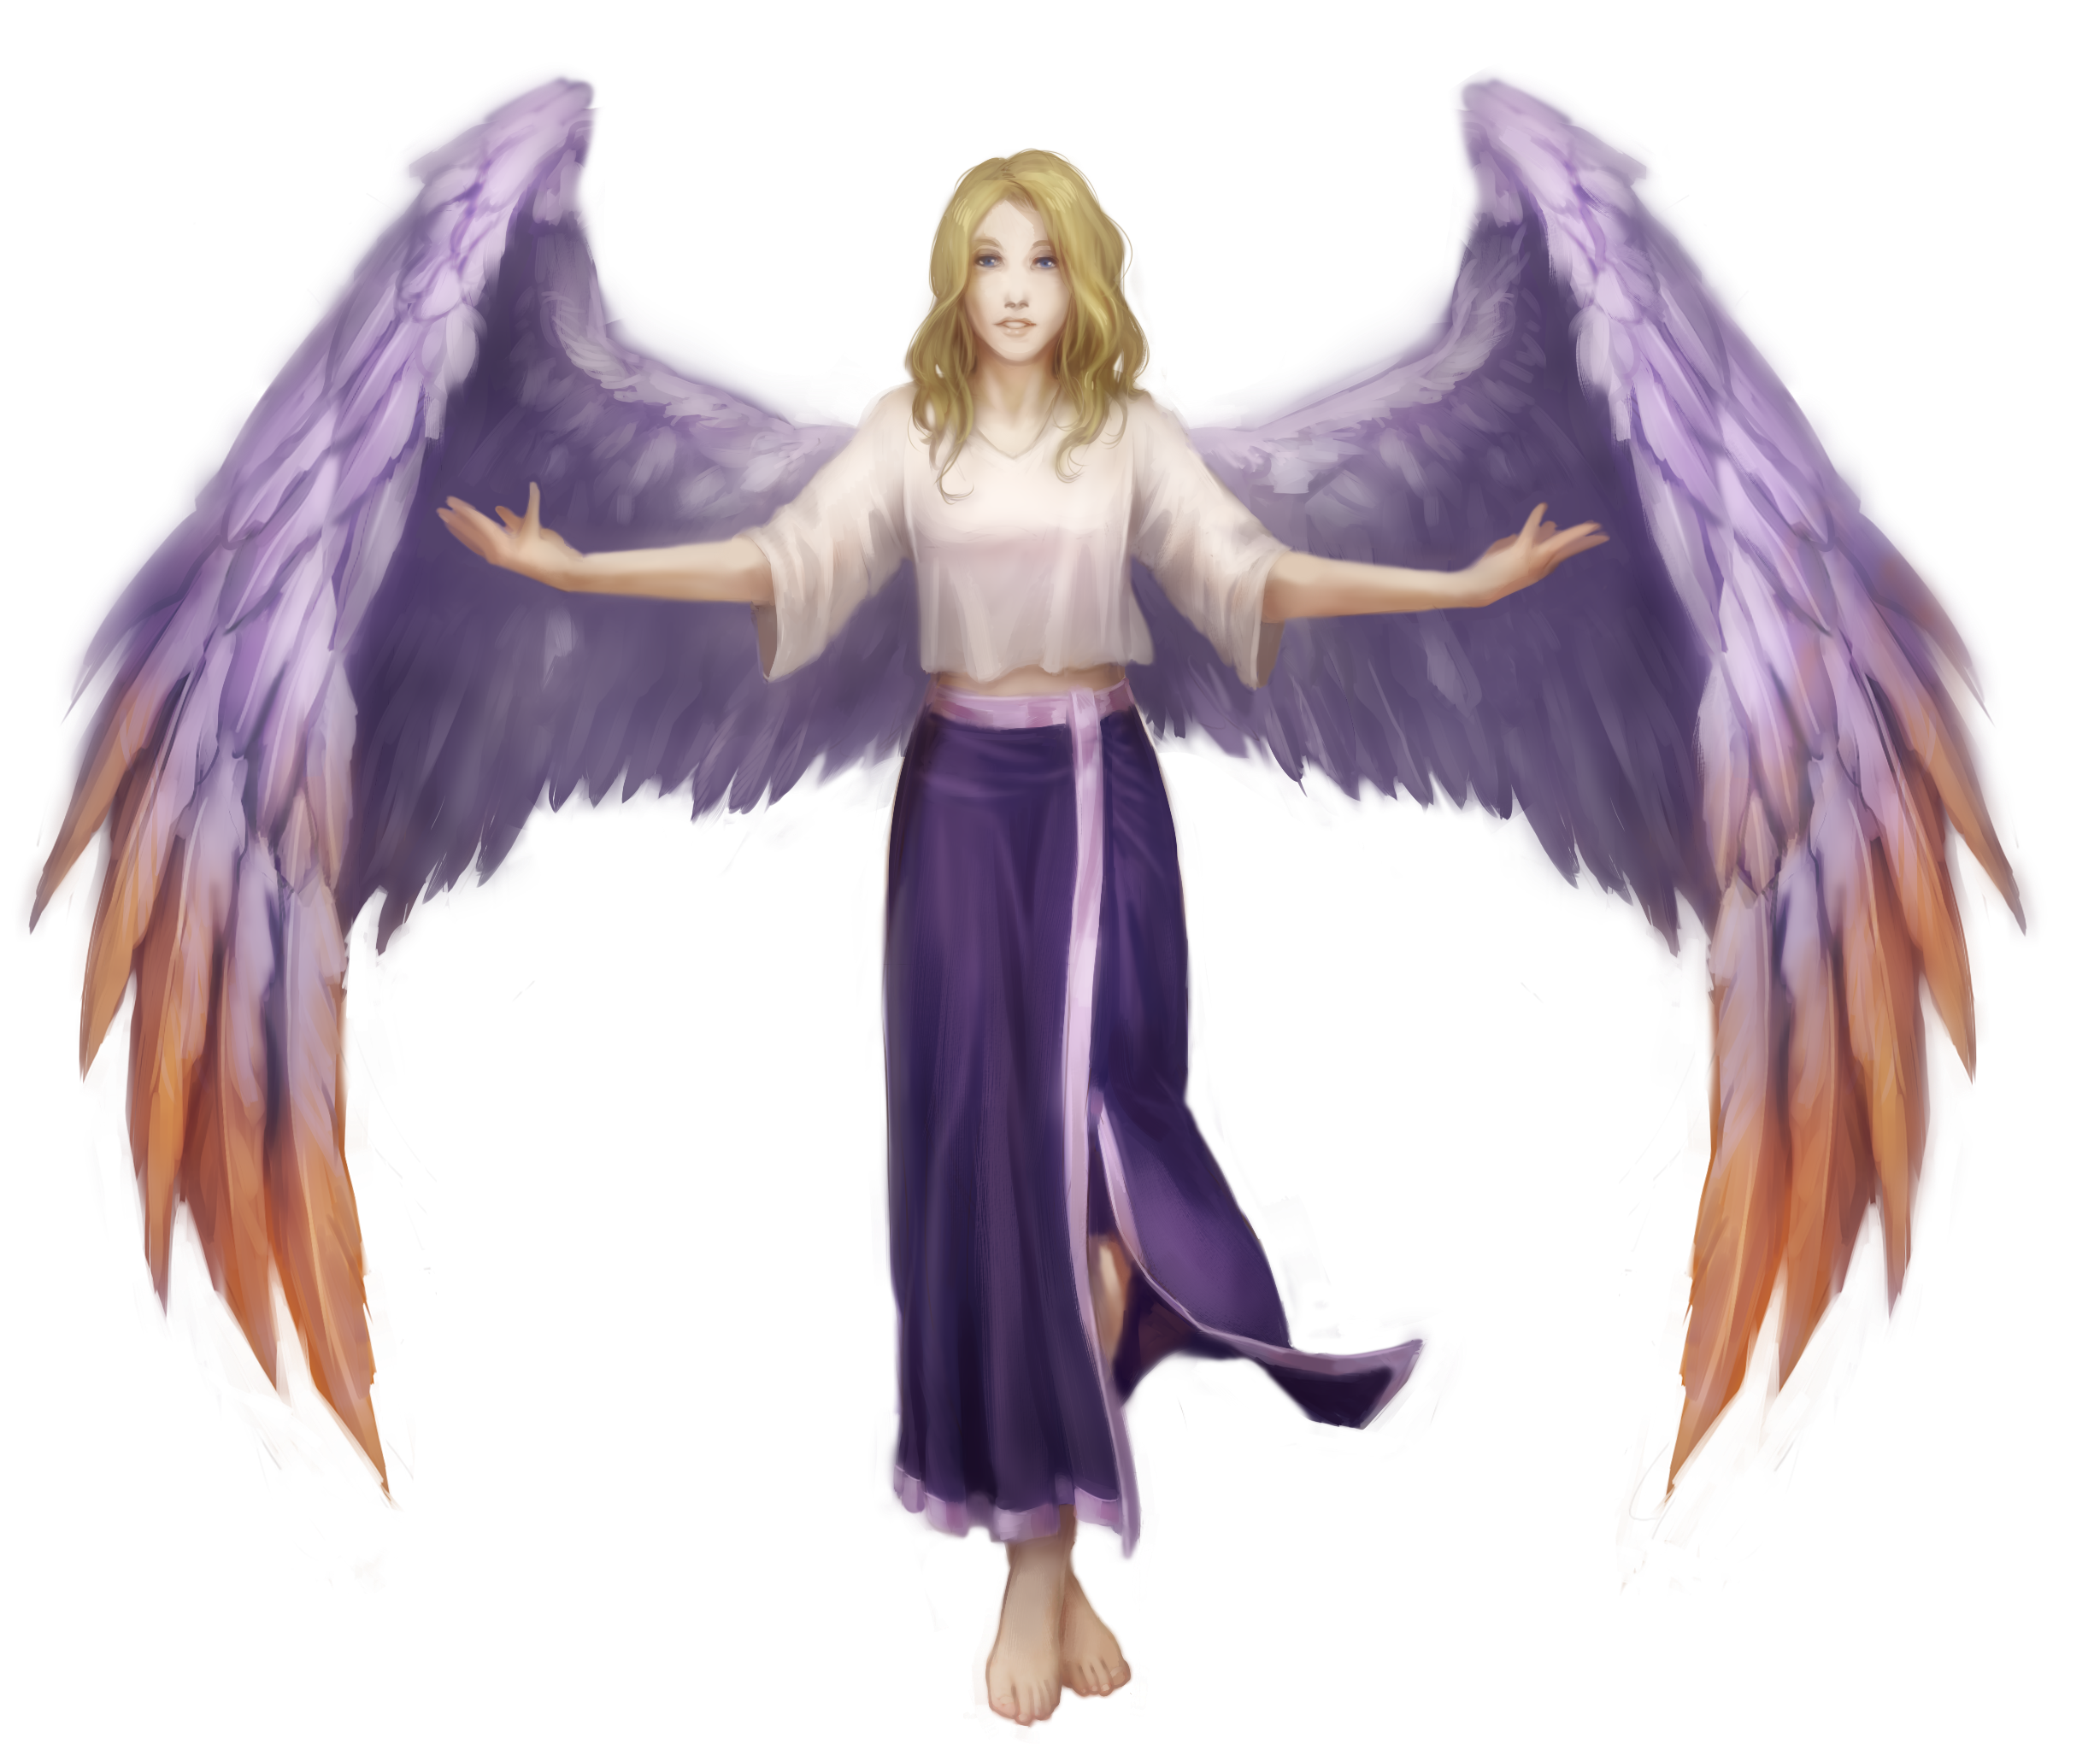 Character is Air - EE - Ah - Nah (A-R-R-E-A-N-A) from DSL: A winged woman is standing here with her wings half curled and her arms outstretched. She has shoulder-length blonde hair which falls in waves around her face. She wears a simple white blouse with elbow-length sleeves. The blouse is a full cut, but with her arms lifted a bit of her midriff is exposed. She wears a dark purple wrap skirt which is trimmed in a light lavender and falls down to her shins.